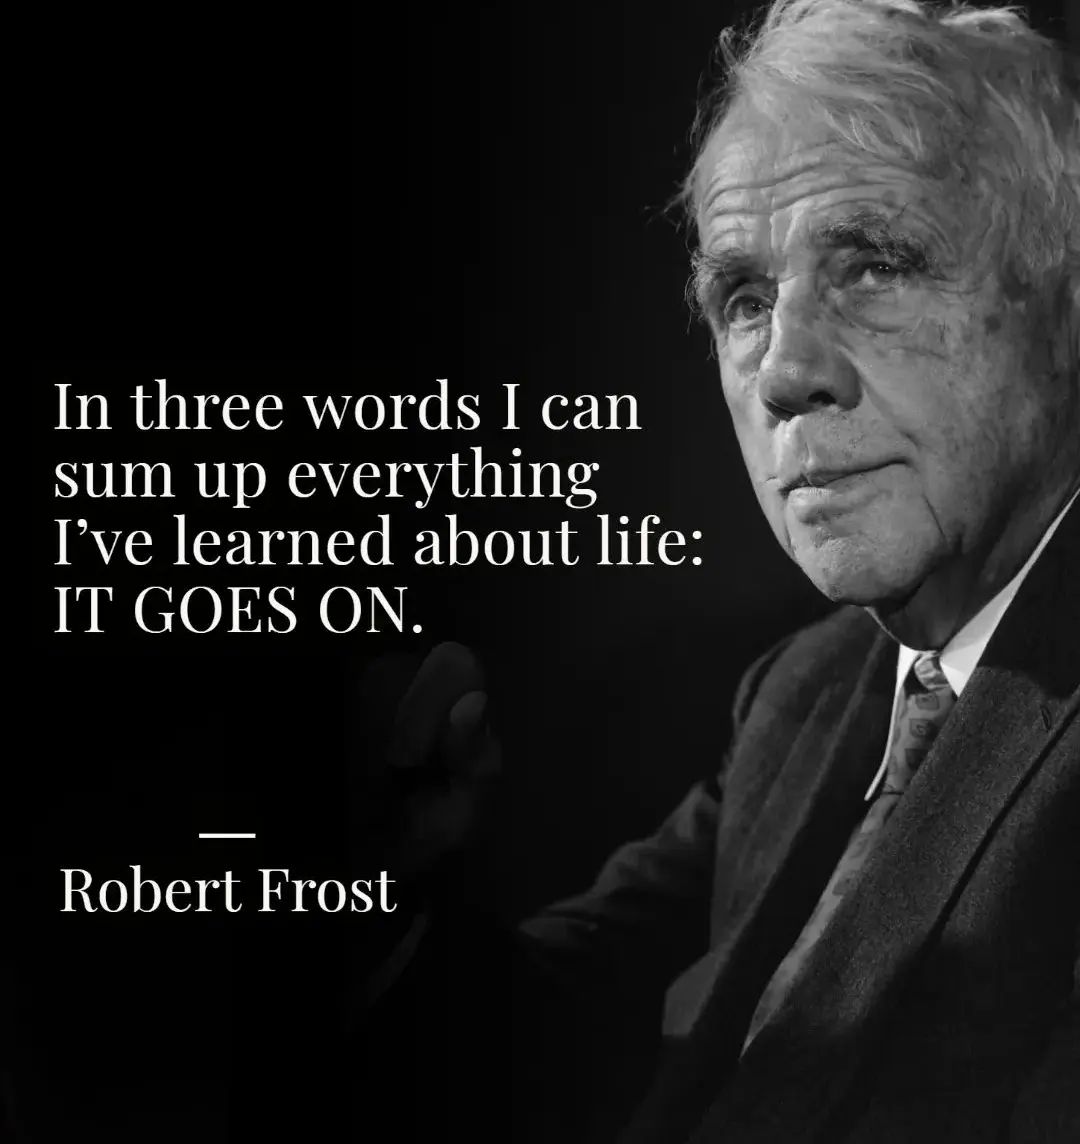 In three words I can sum up everything I’ve learned about life: it goes on. Robert Frost